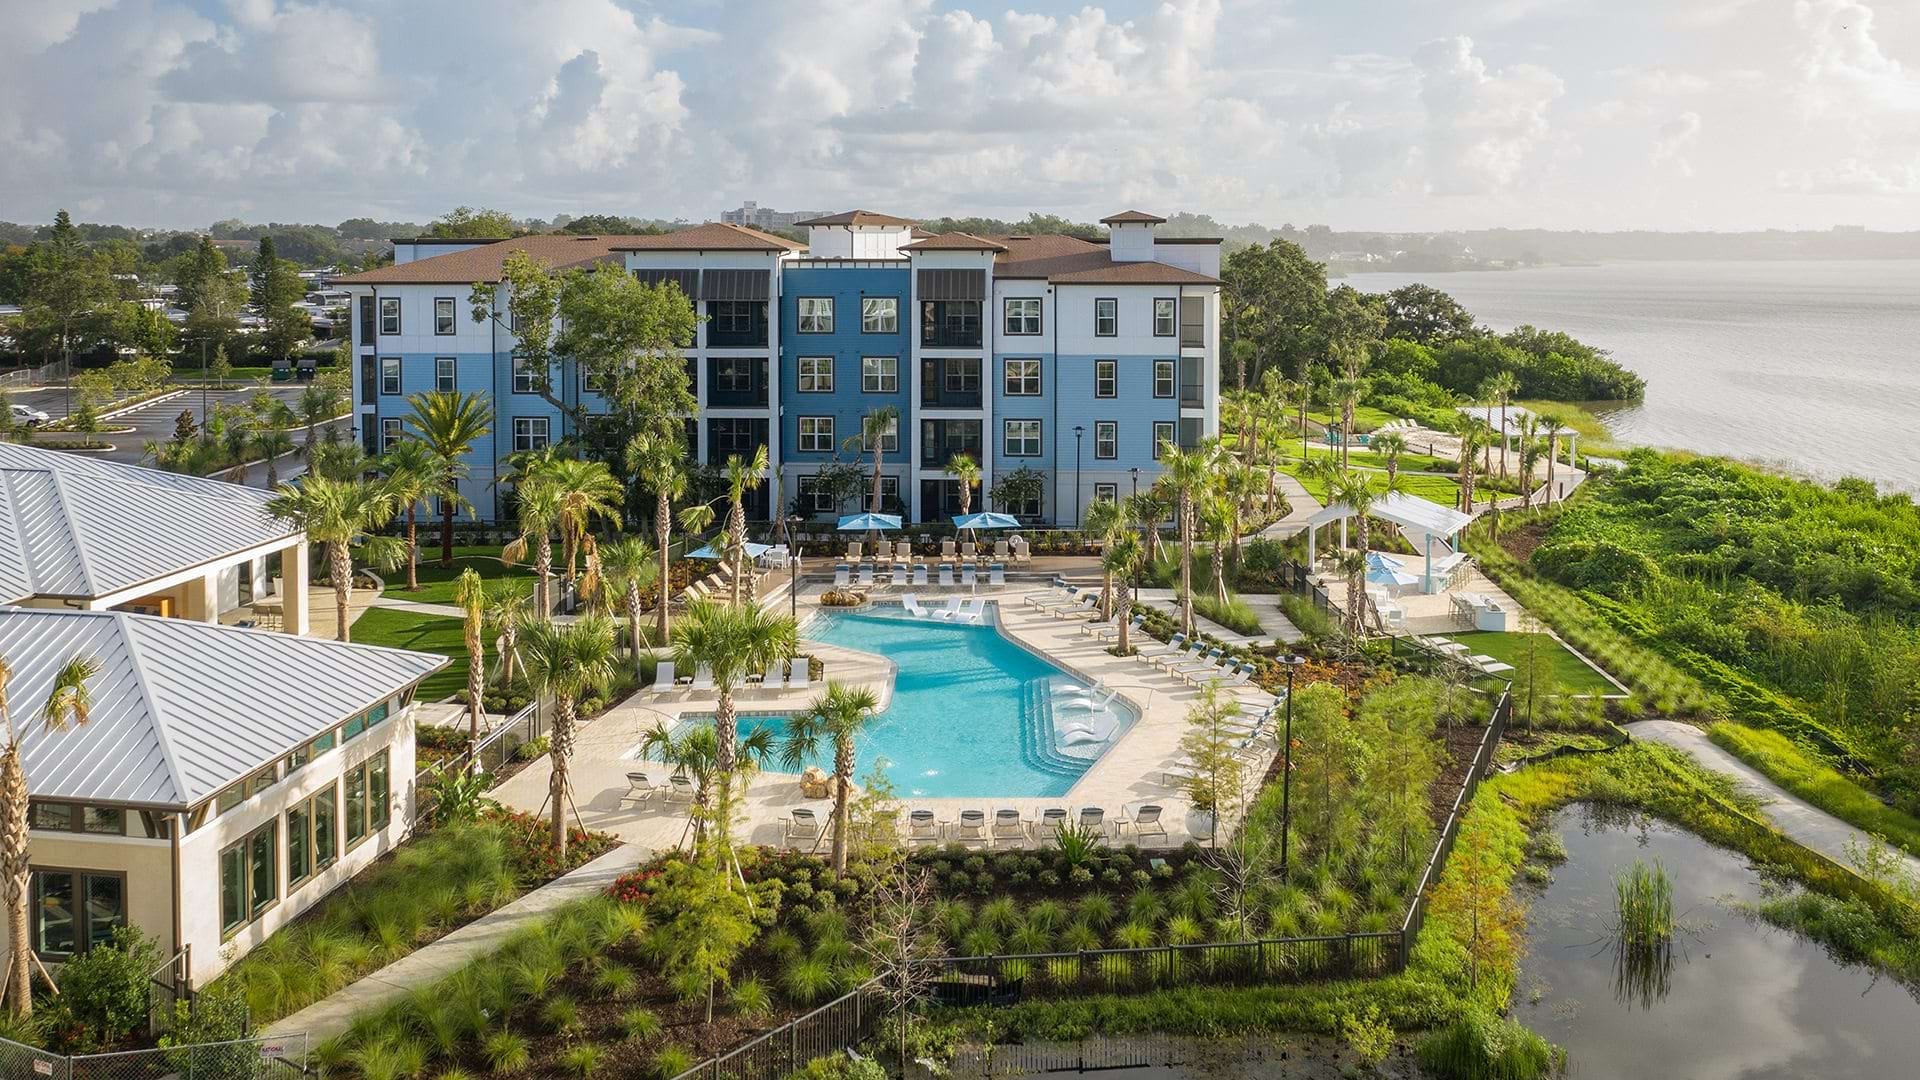 Aerial view of our luxury apartments in Clearwater, FL